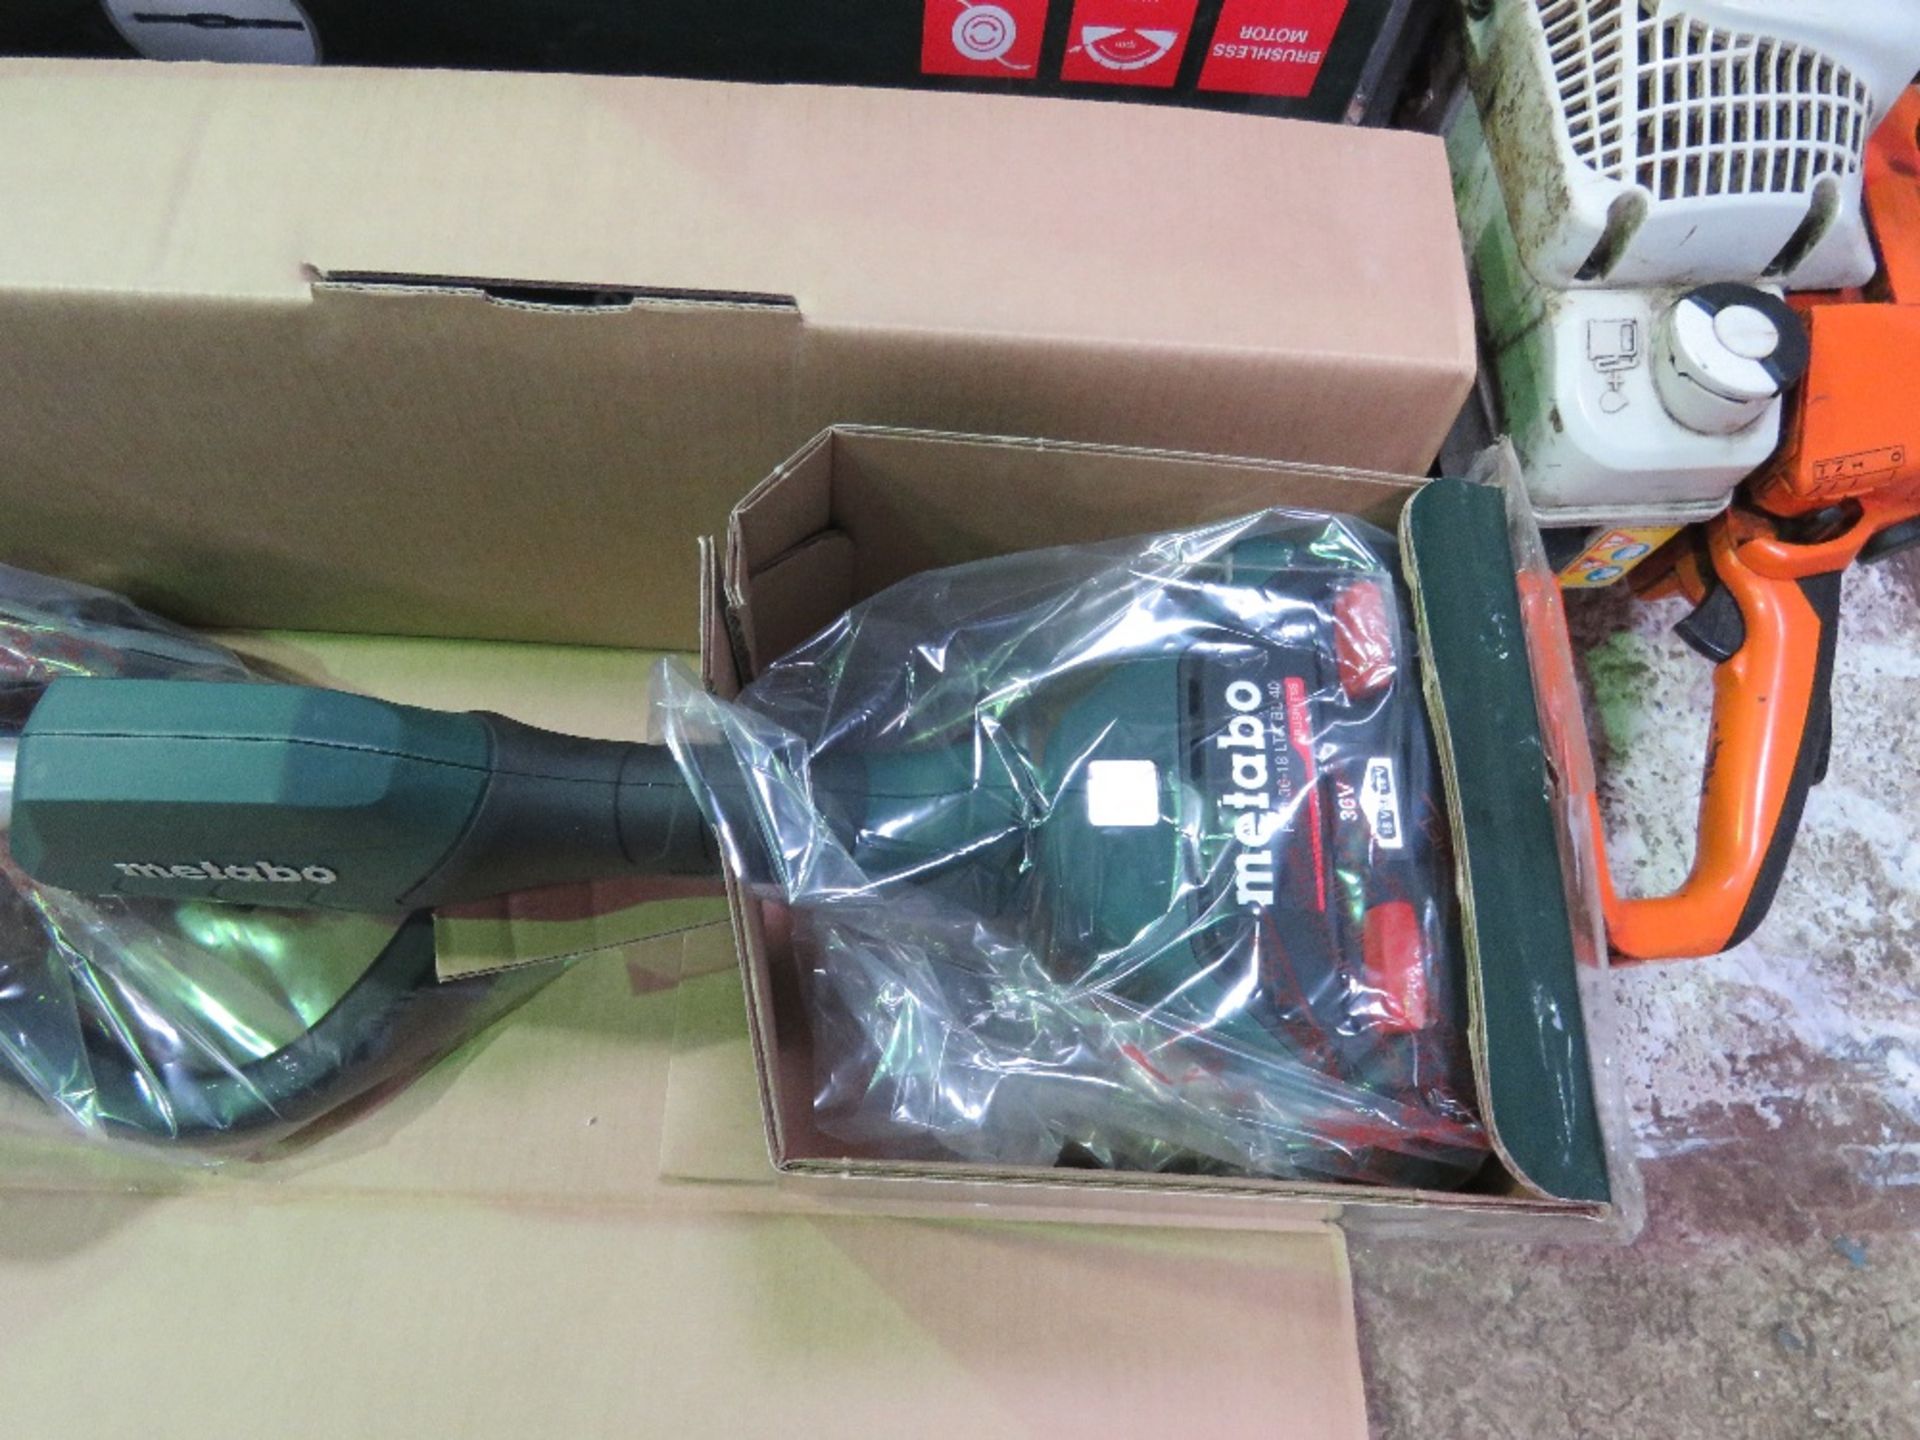 2 X METABO STRAIGHT SHAFT HD 36VOLT BATTERY BRUSH CUTTERS/STRIMMERS, NO BATTERIES, UNUSED. THIS L - Image 3 of 7